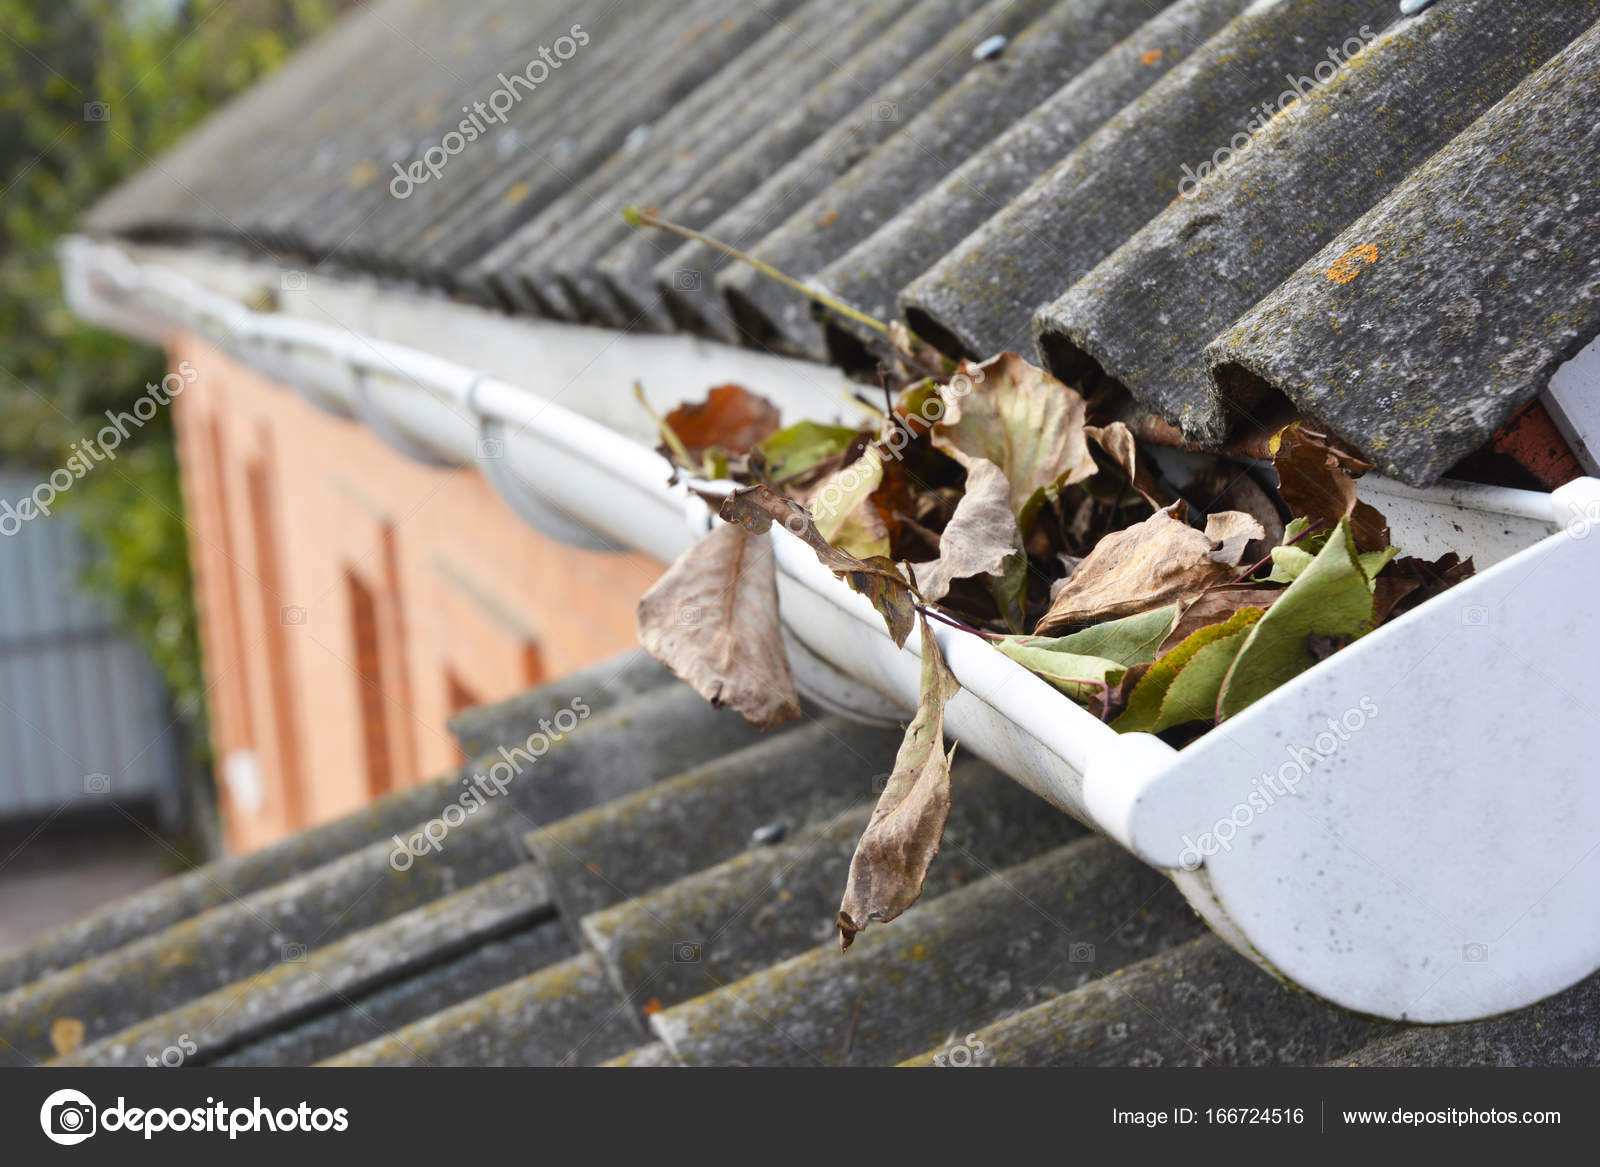 Rain Gutters Cleaning from Leaves. Guttering works. — Stock Photo © thefutureis 166724516